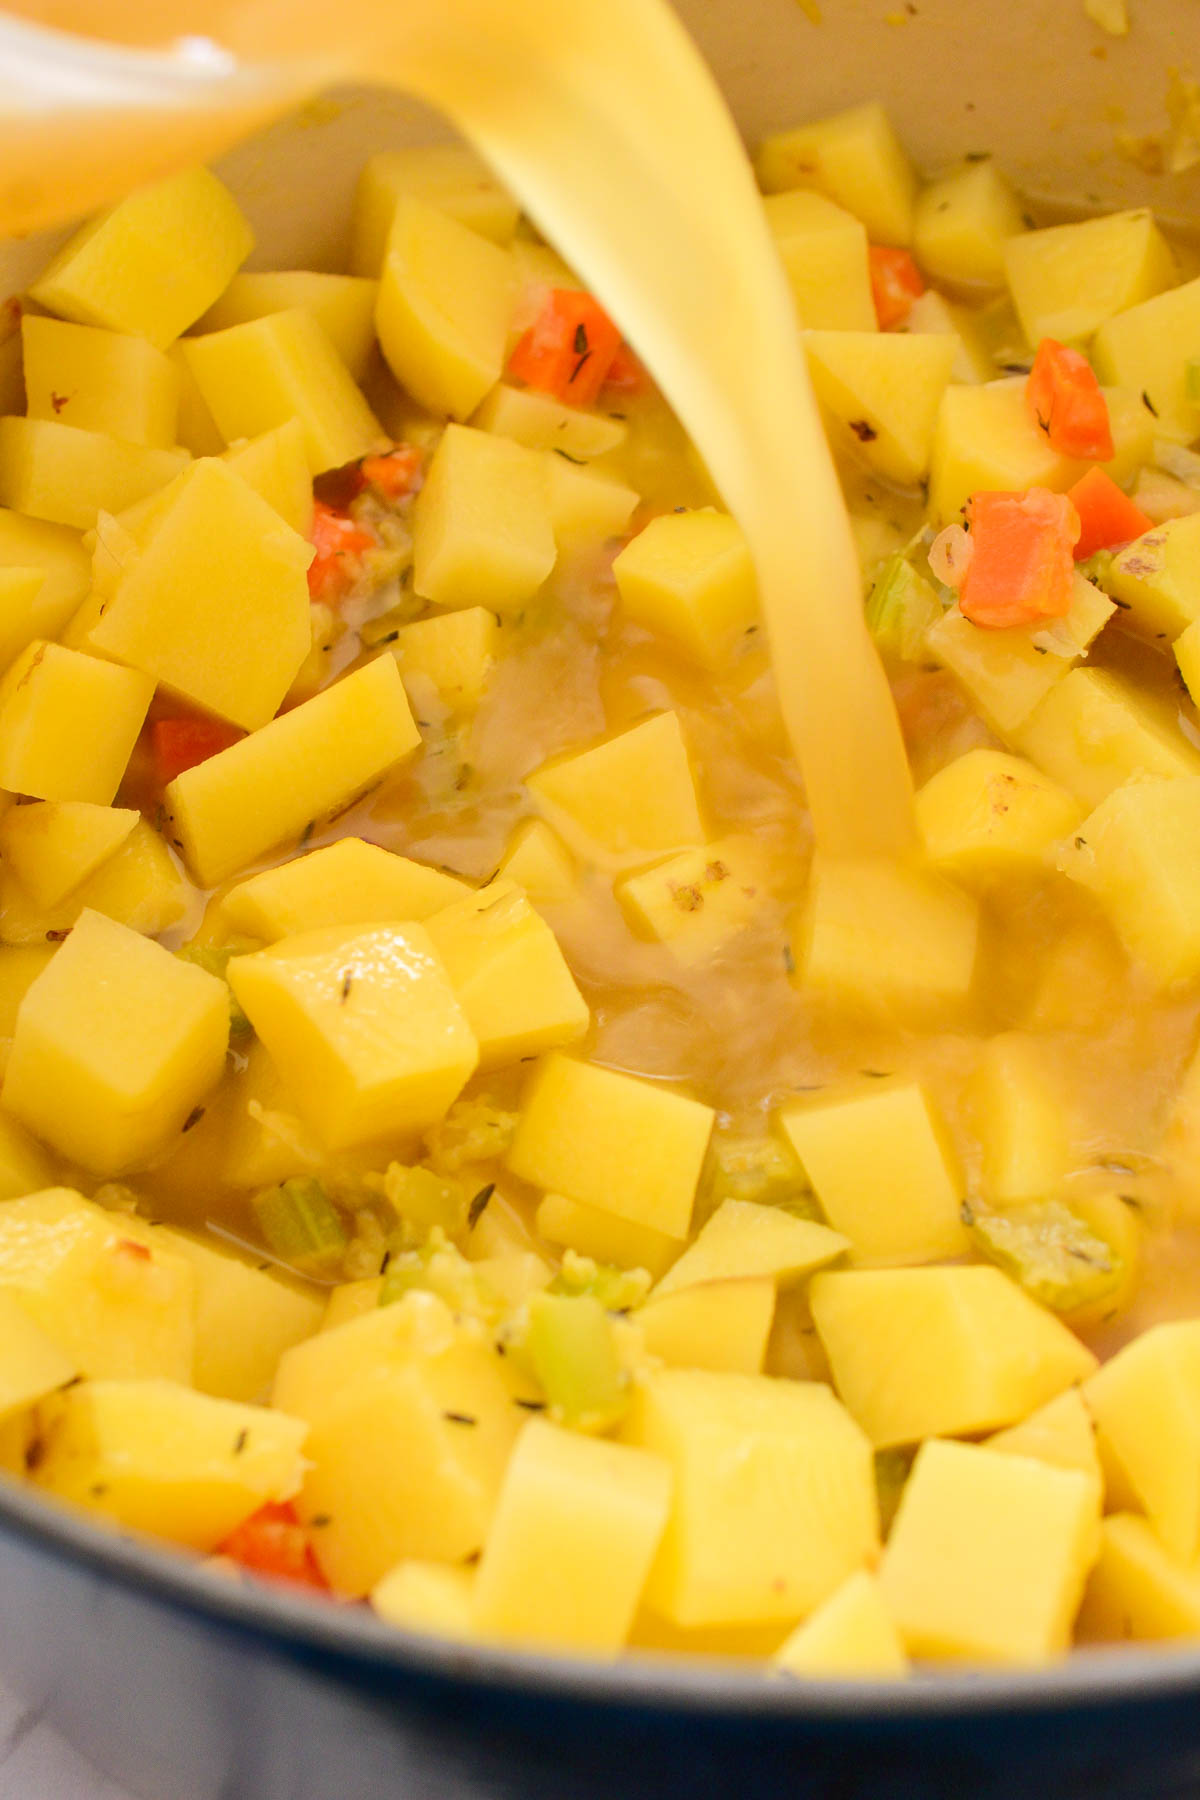 Pouring vegetable stock into the pot of potatoes and veggies,